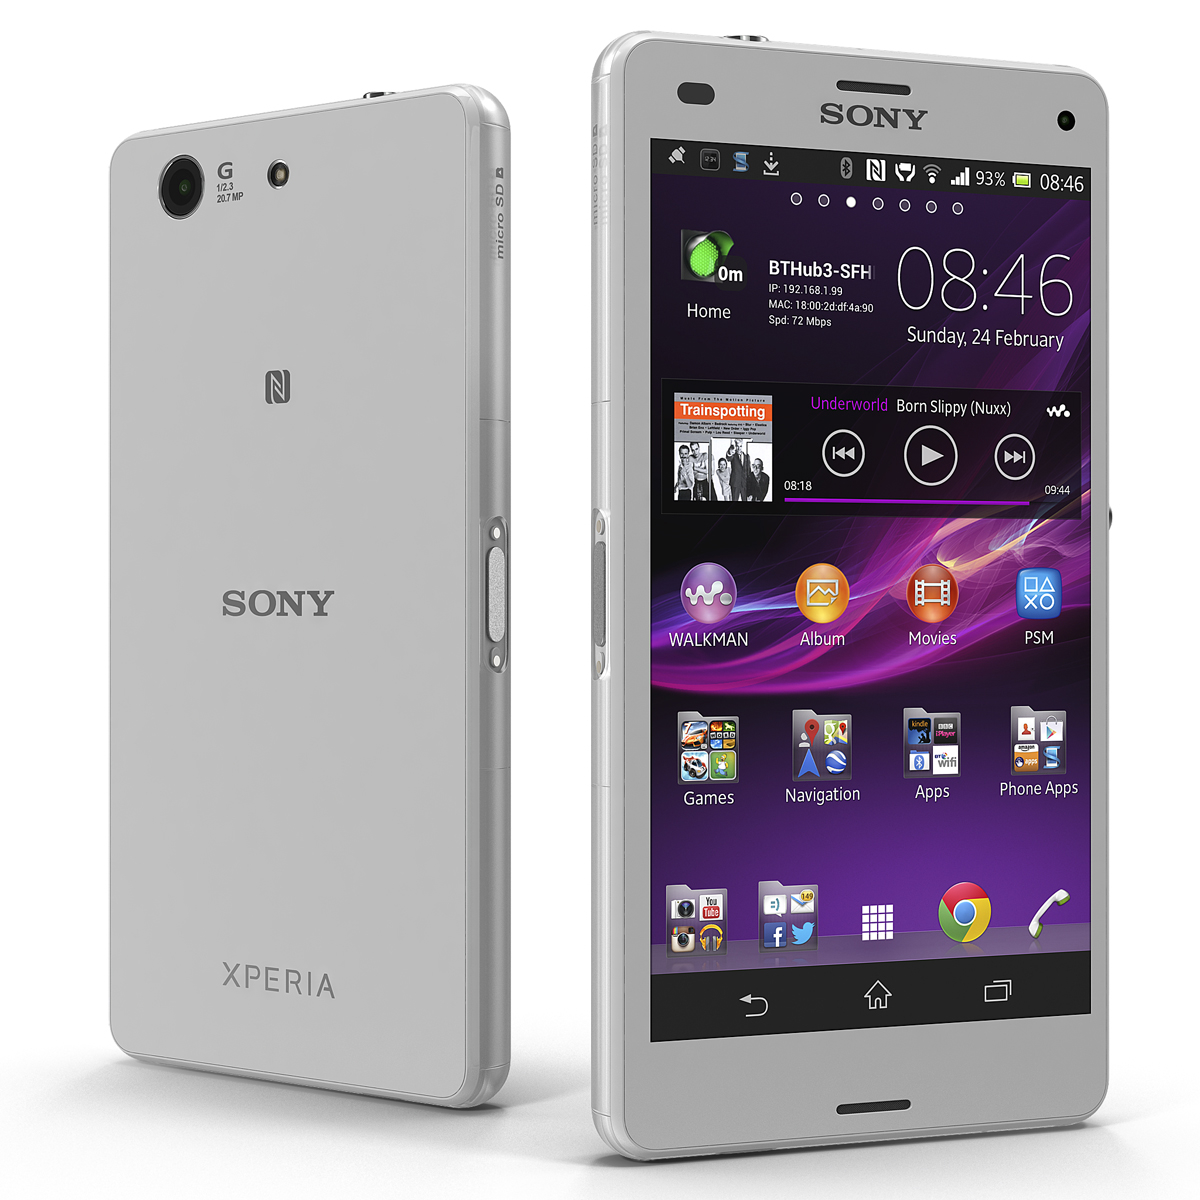 Z3 compact. Sony z3 Compact. Sony Xperia z3 Compact. Xperia z3 Compact White. Sony Xperia z3 Compact d5803 White.